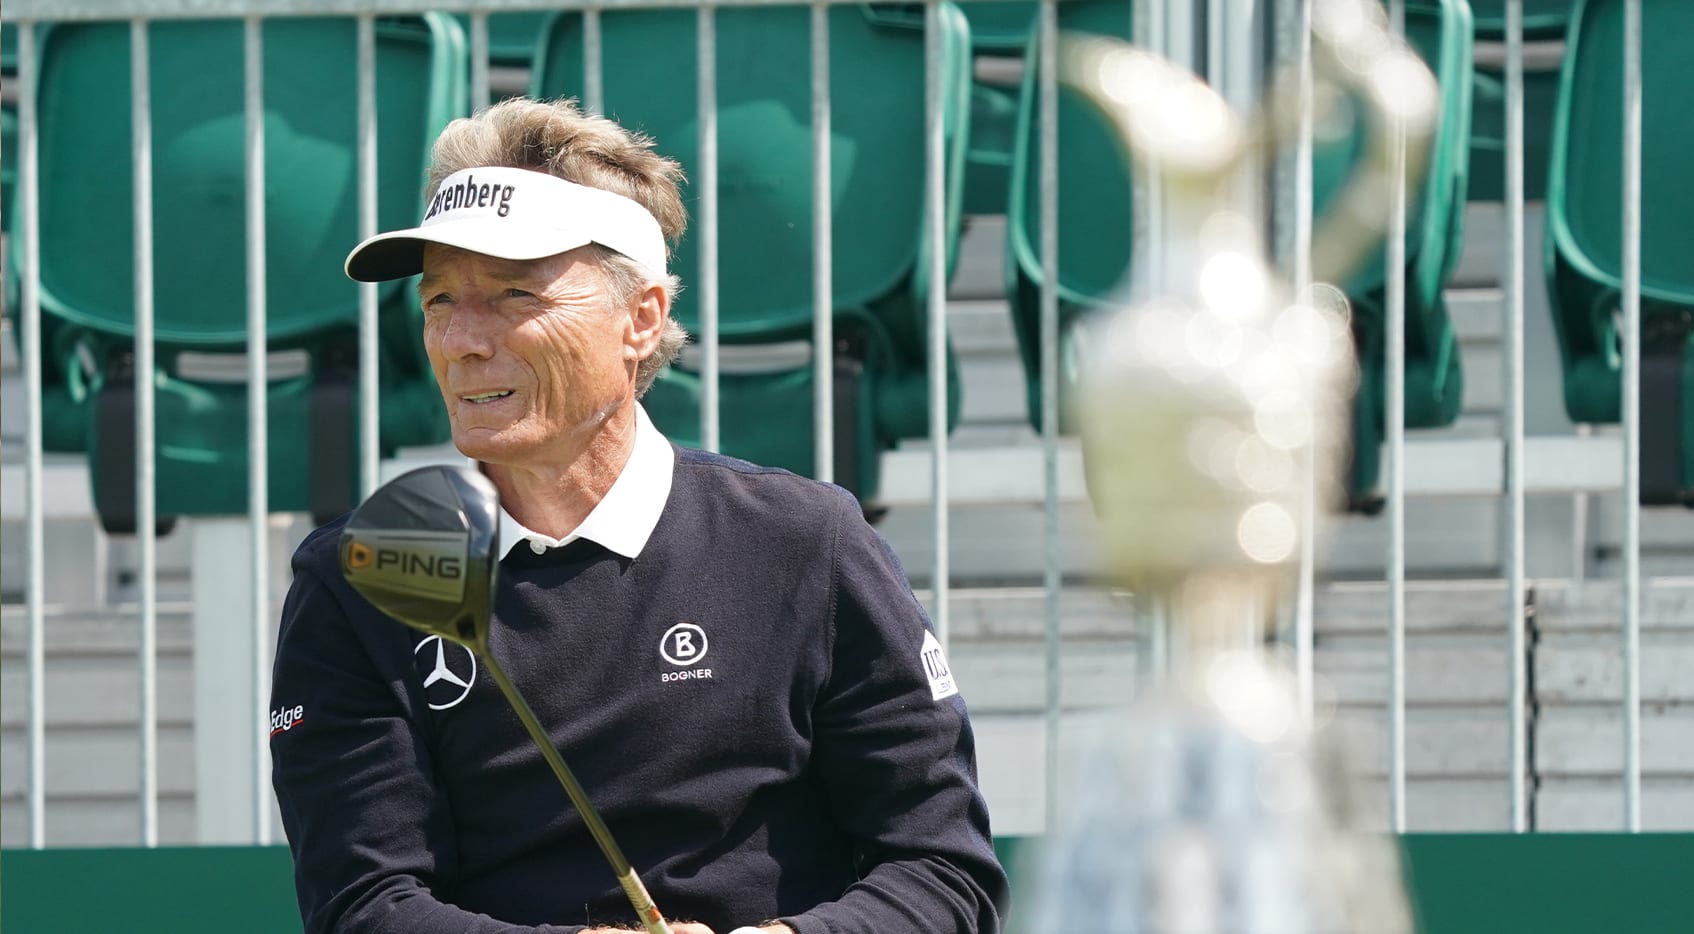 Bernhard Langer ready to use experience to capture his fifth Senior